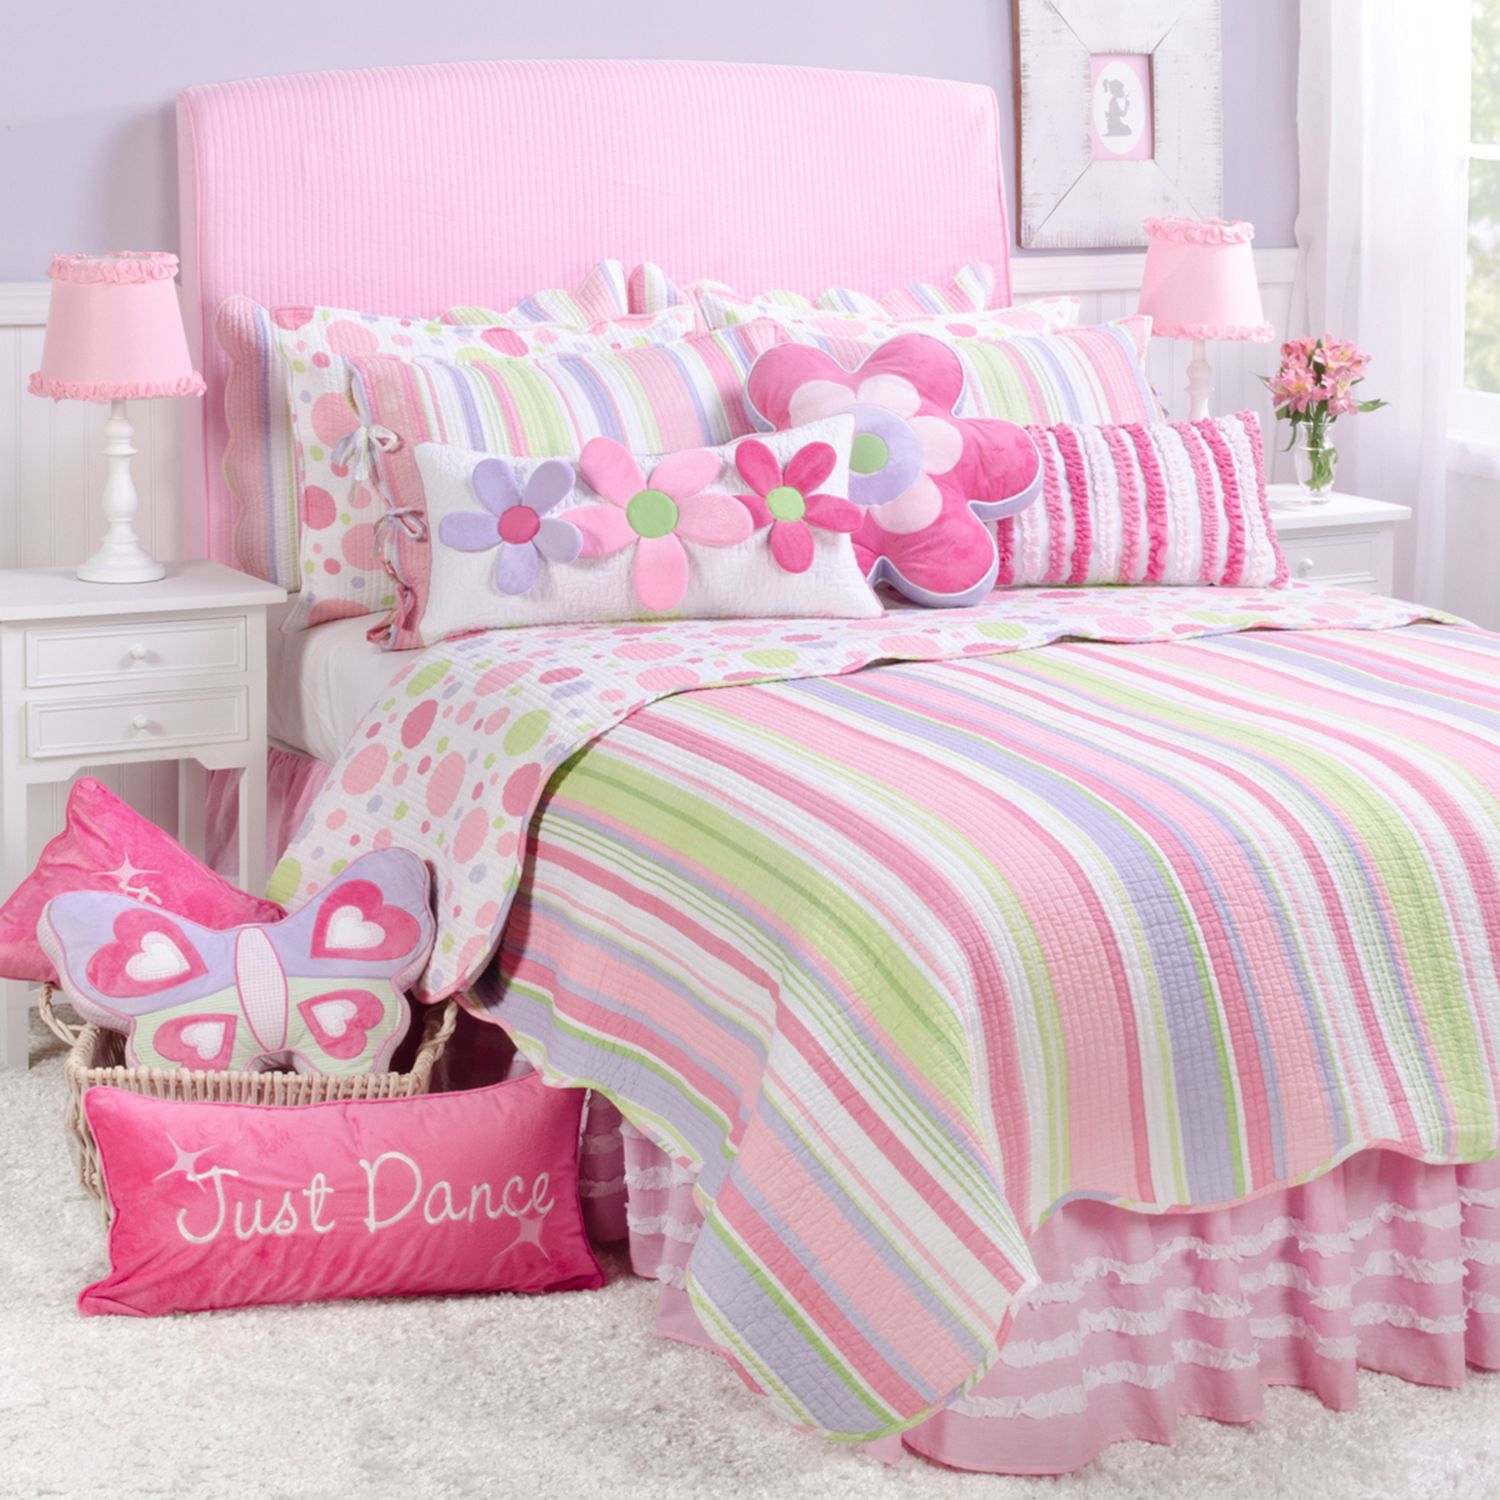 Image for Levtex Home Merrill Girl Reversible Quilt Collection at Kohl's.